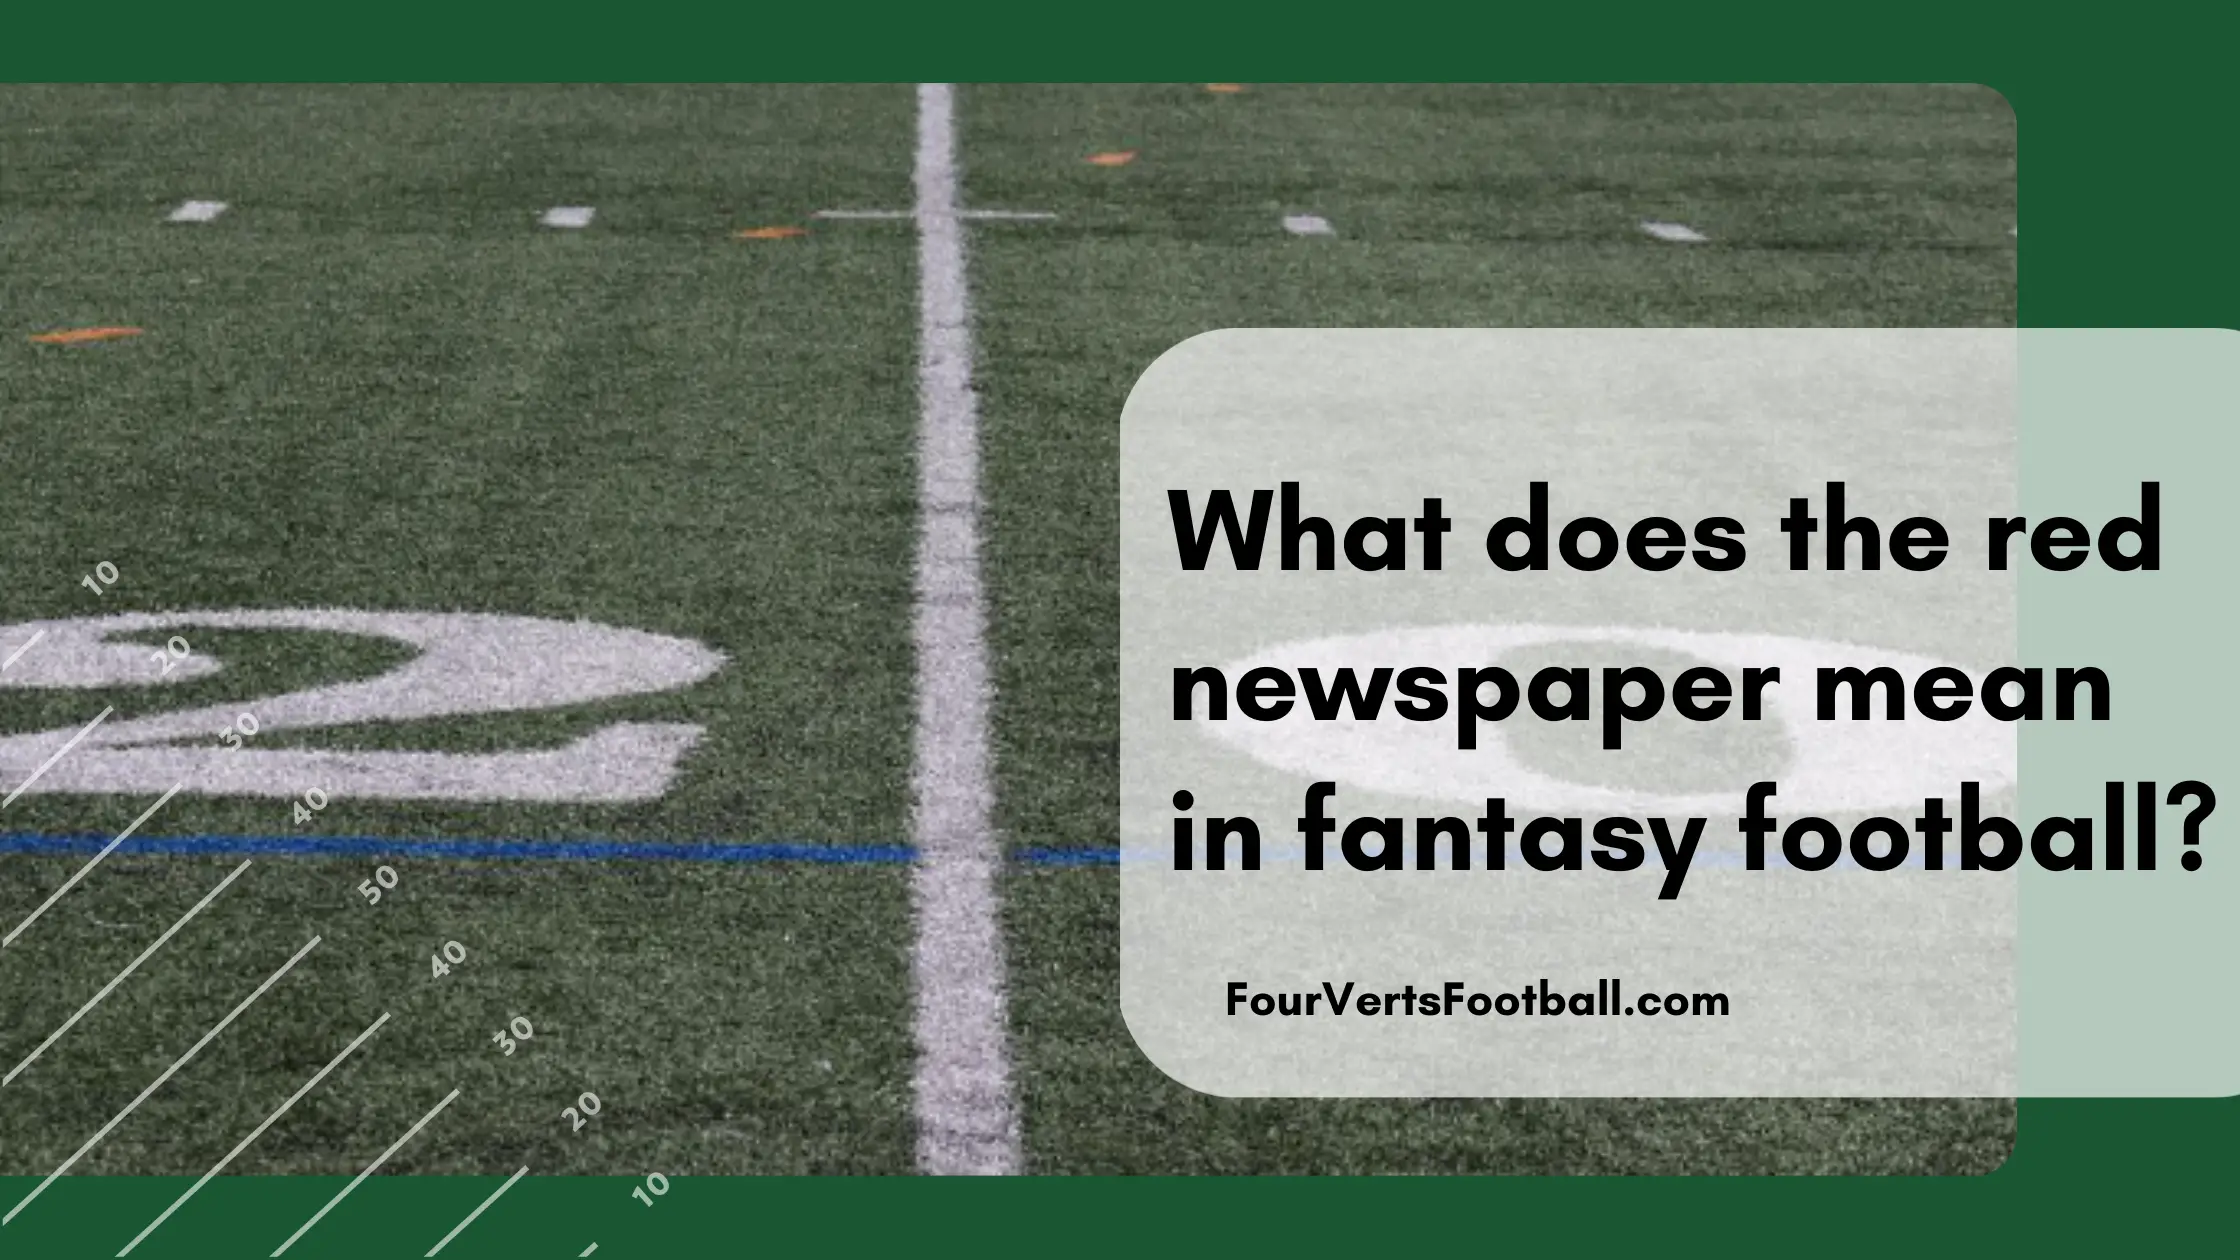 What does the red newspaper mean in fantasy football?